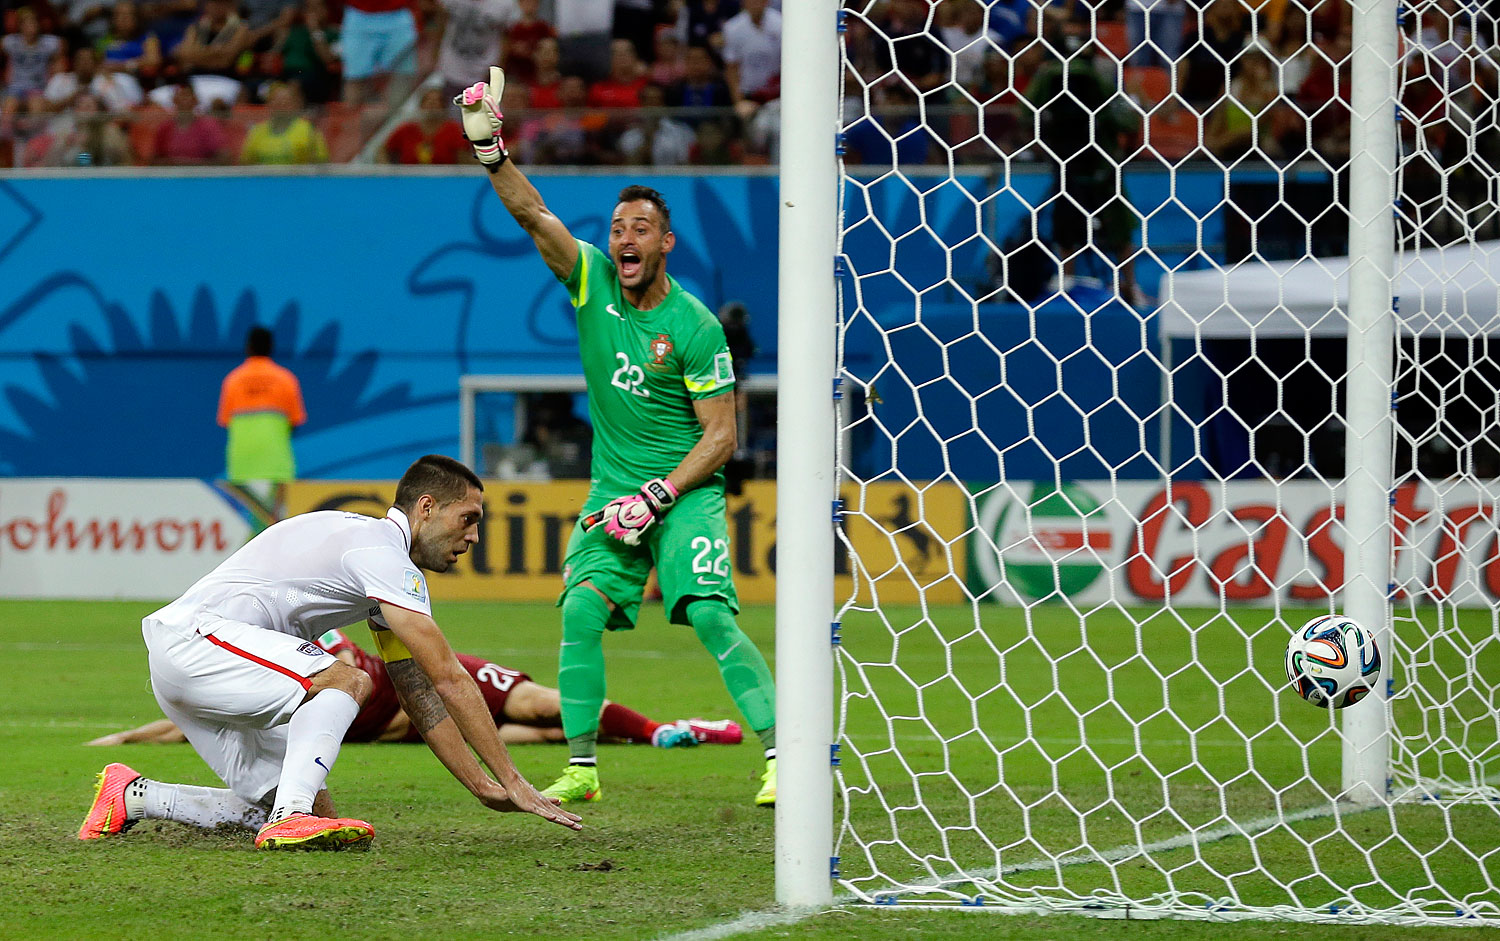 Portugal's goalkeeper Beto reacts after United States' Clint Dempsey scored his side's second goal.